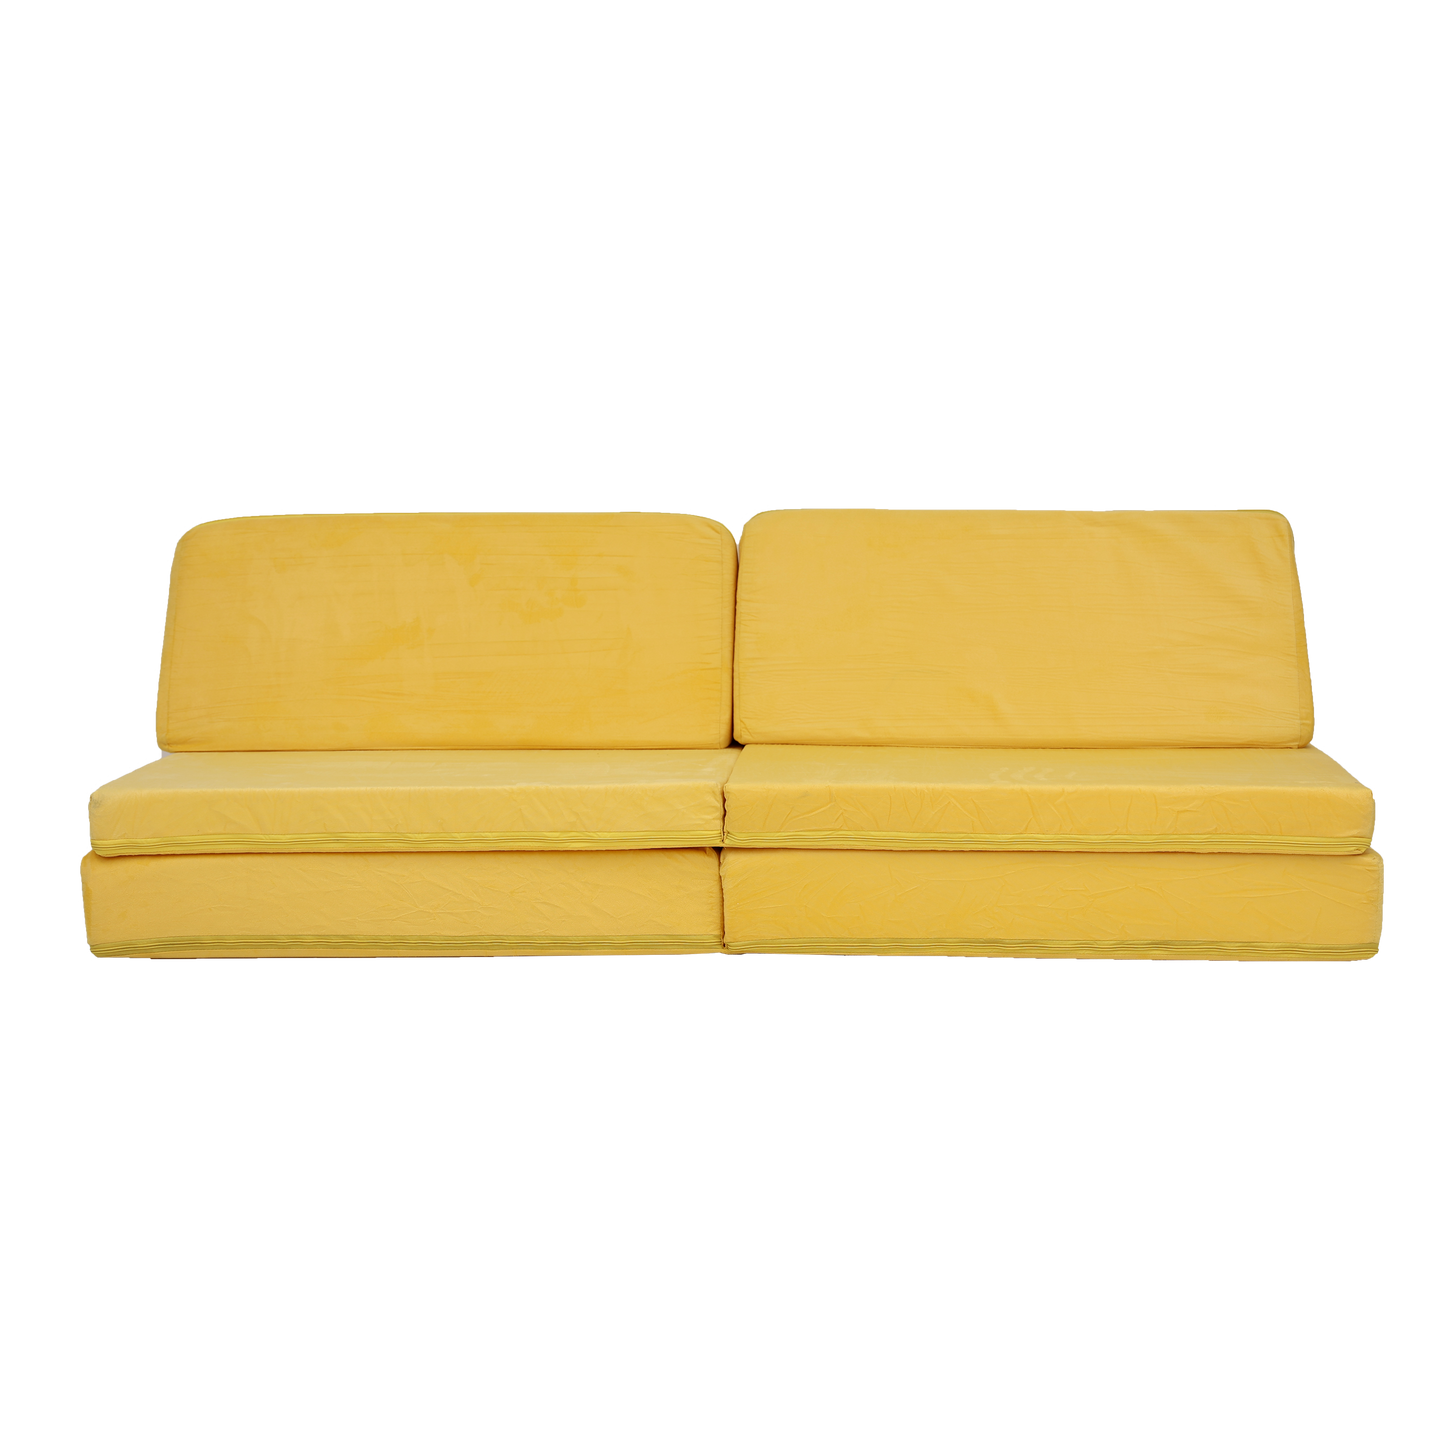 Dream Couch